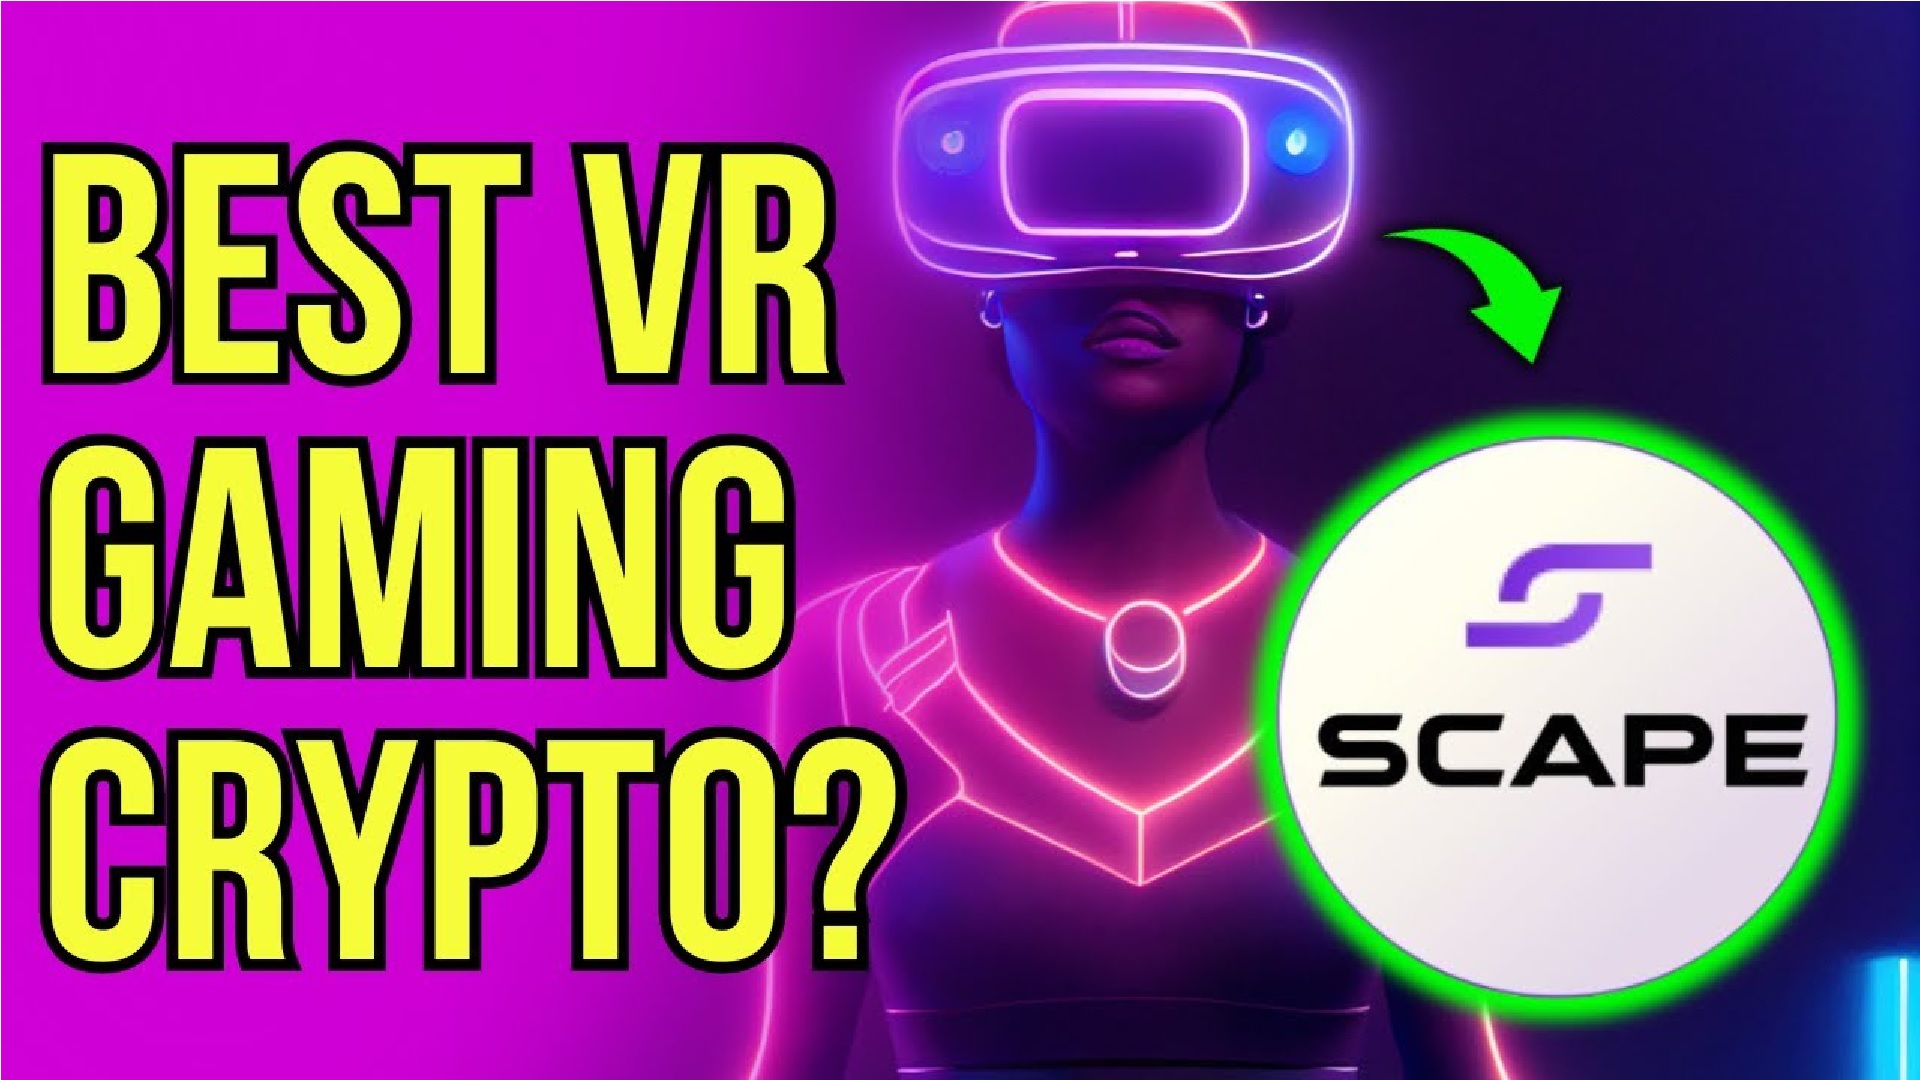 5th Scape: Revolutionary VR-Gaming Cryptocurrency Breaks Barriers, Raises Over $5.5M in Presale